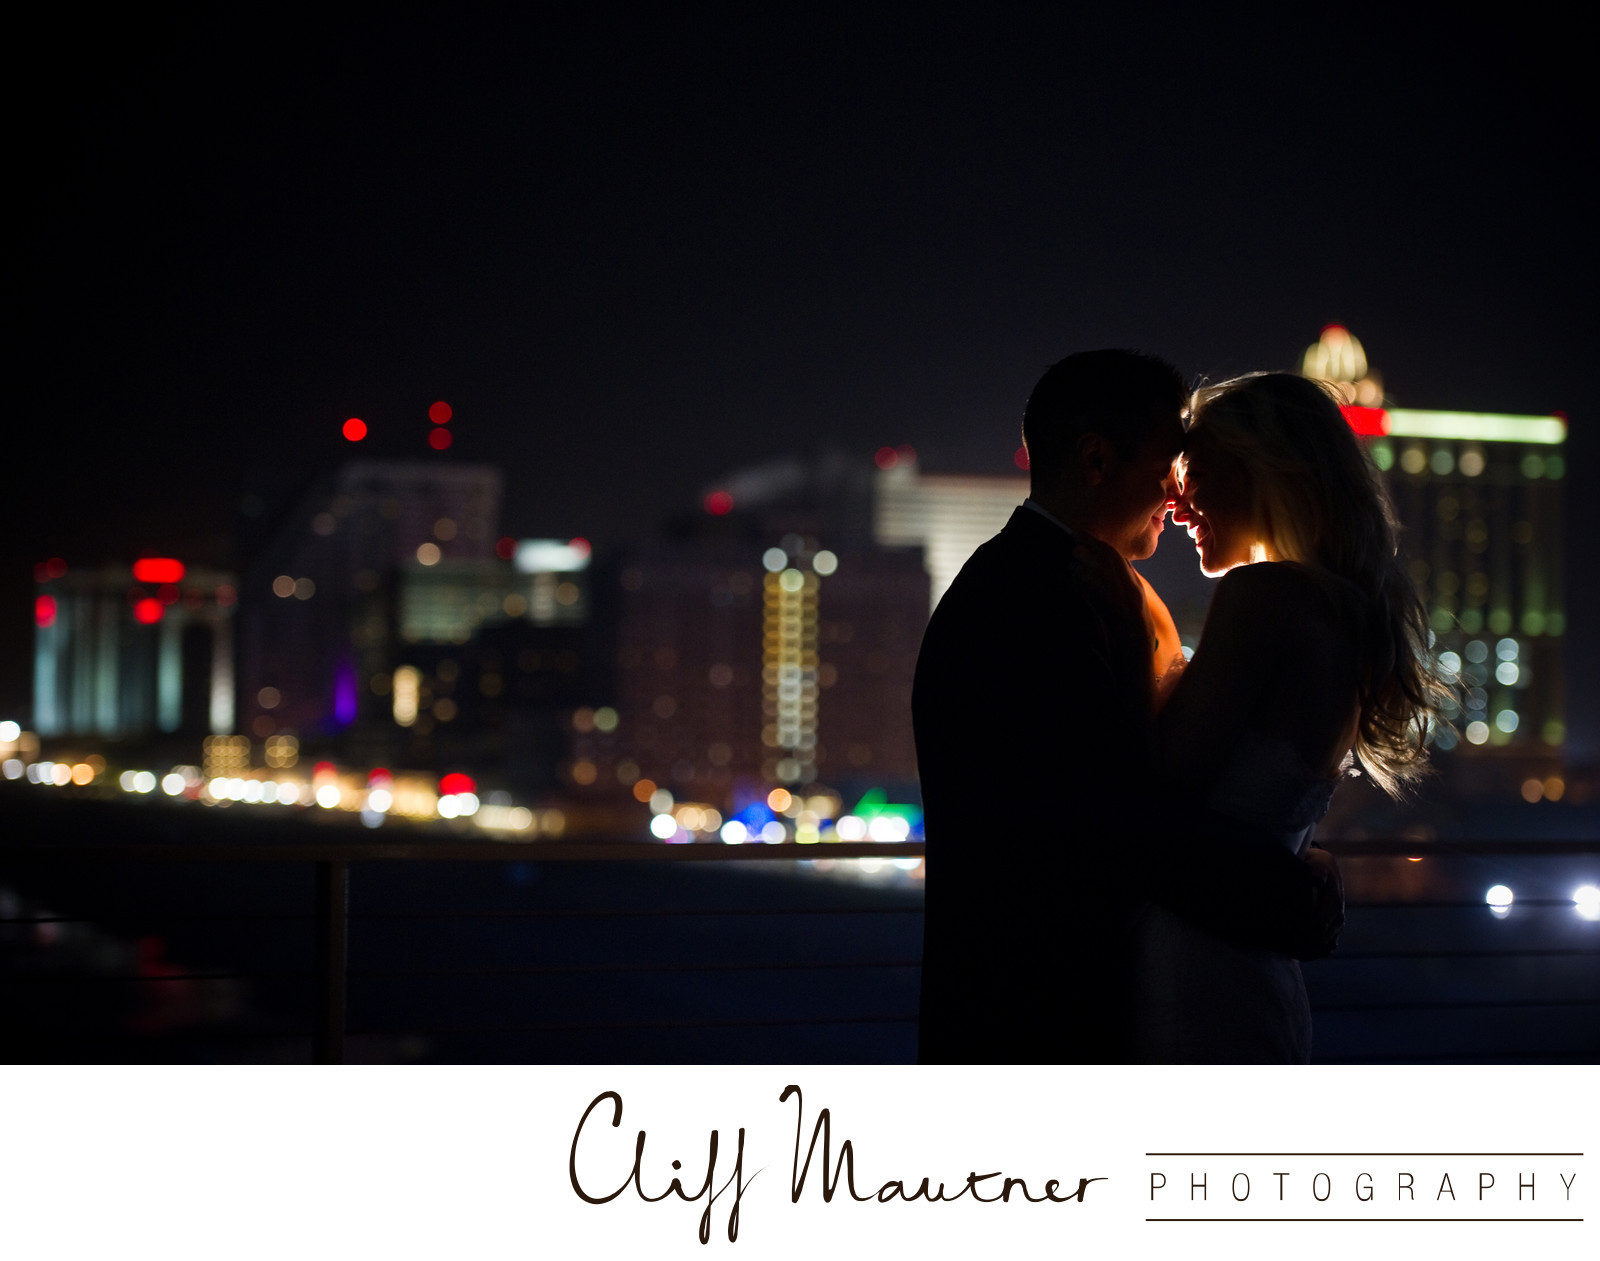 couple in the night city background